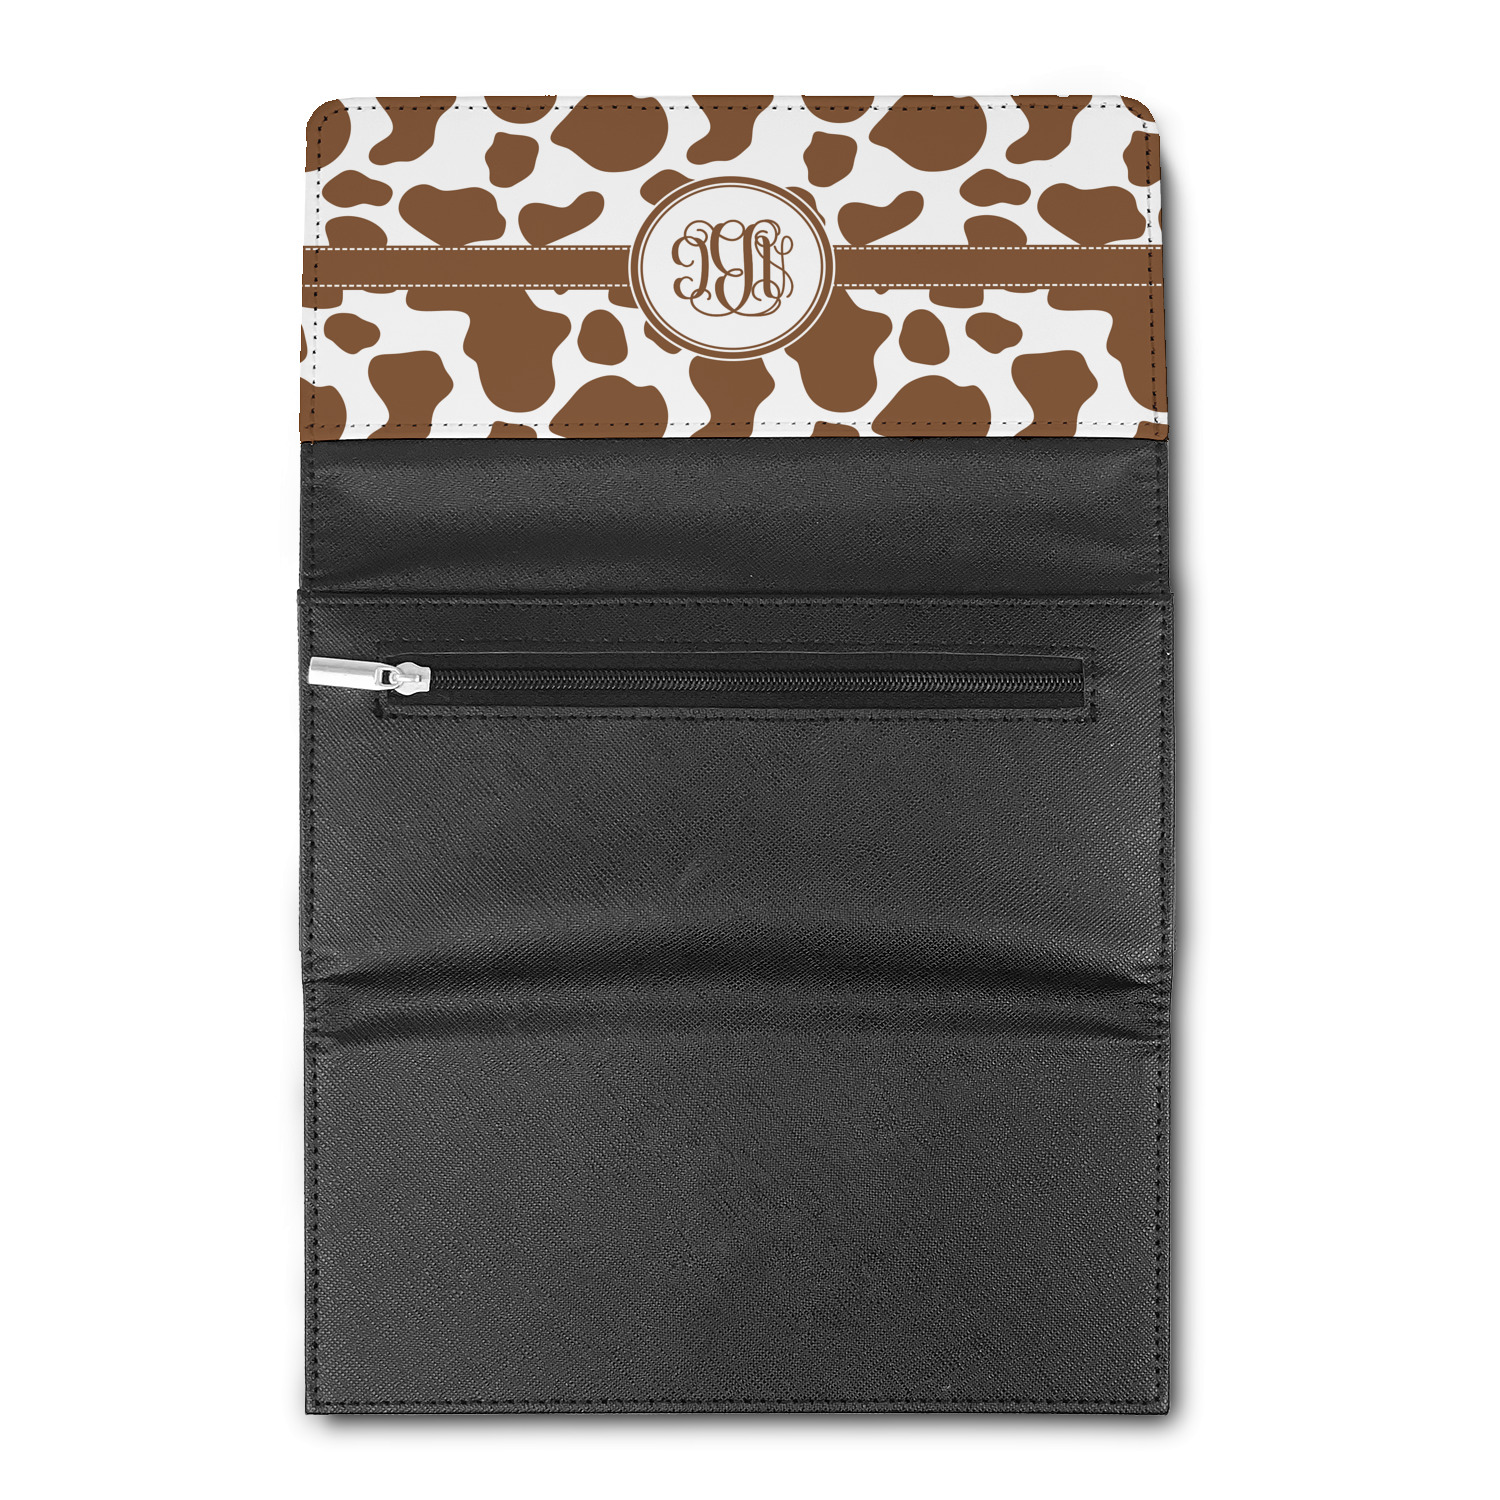 Cow Print Leatherette Ladies Wallet (Personalized) YouCustomizeIt